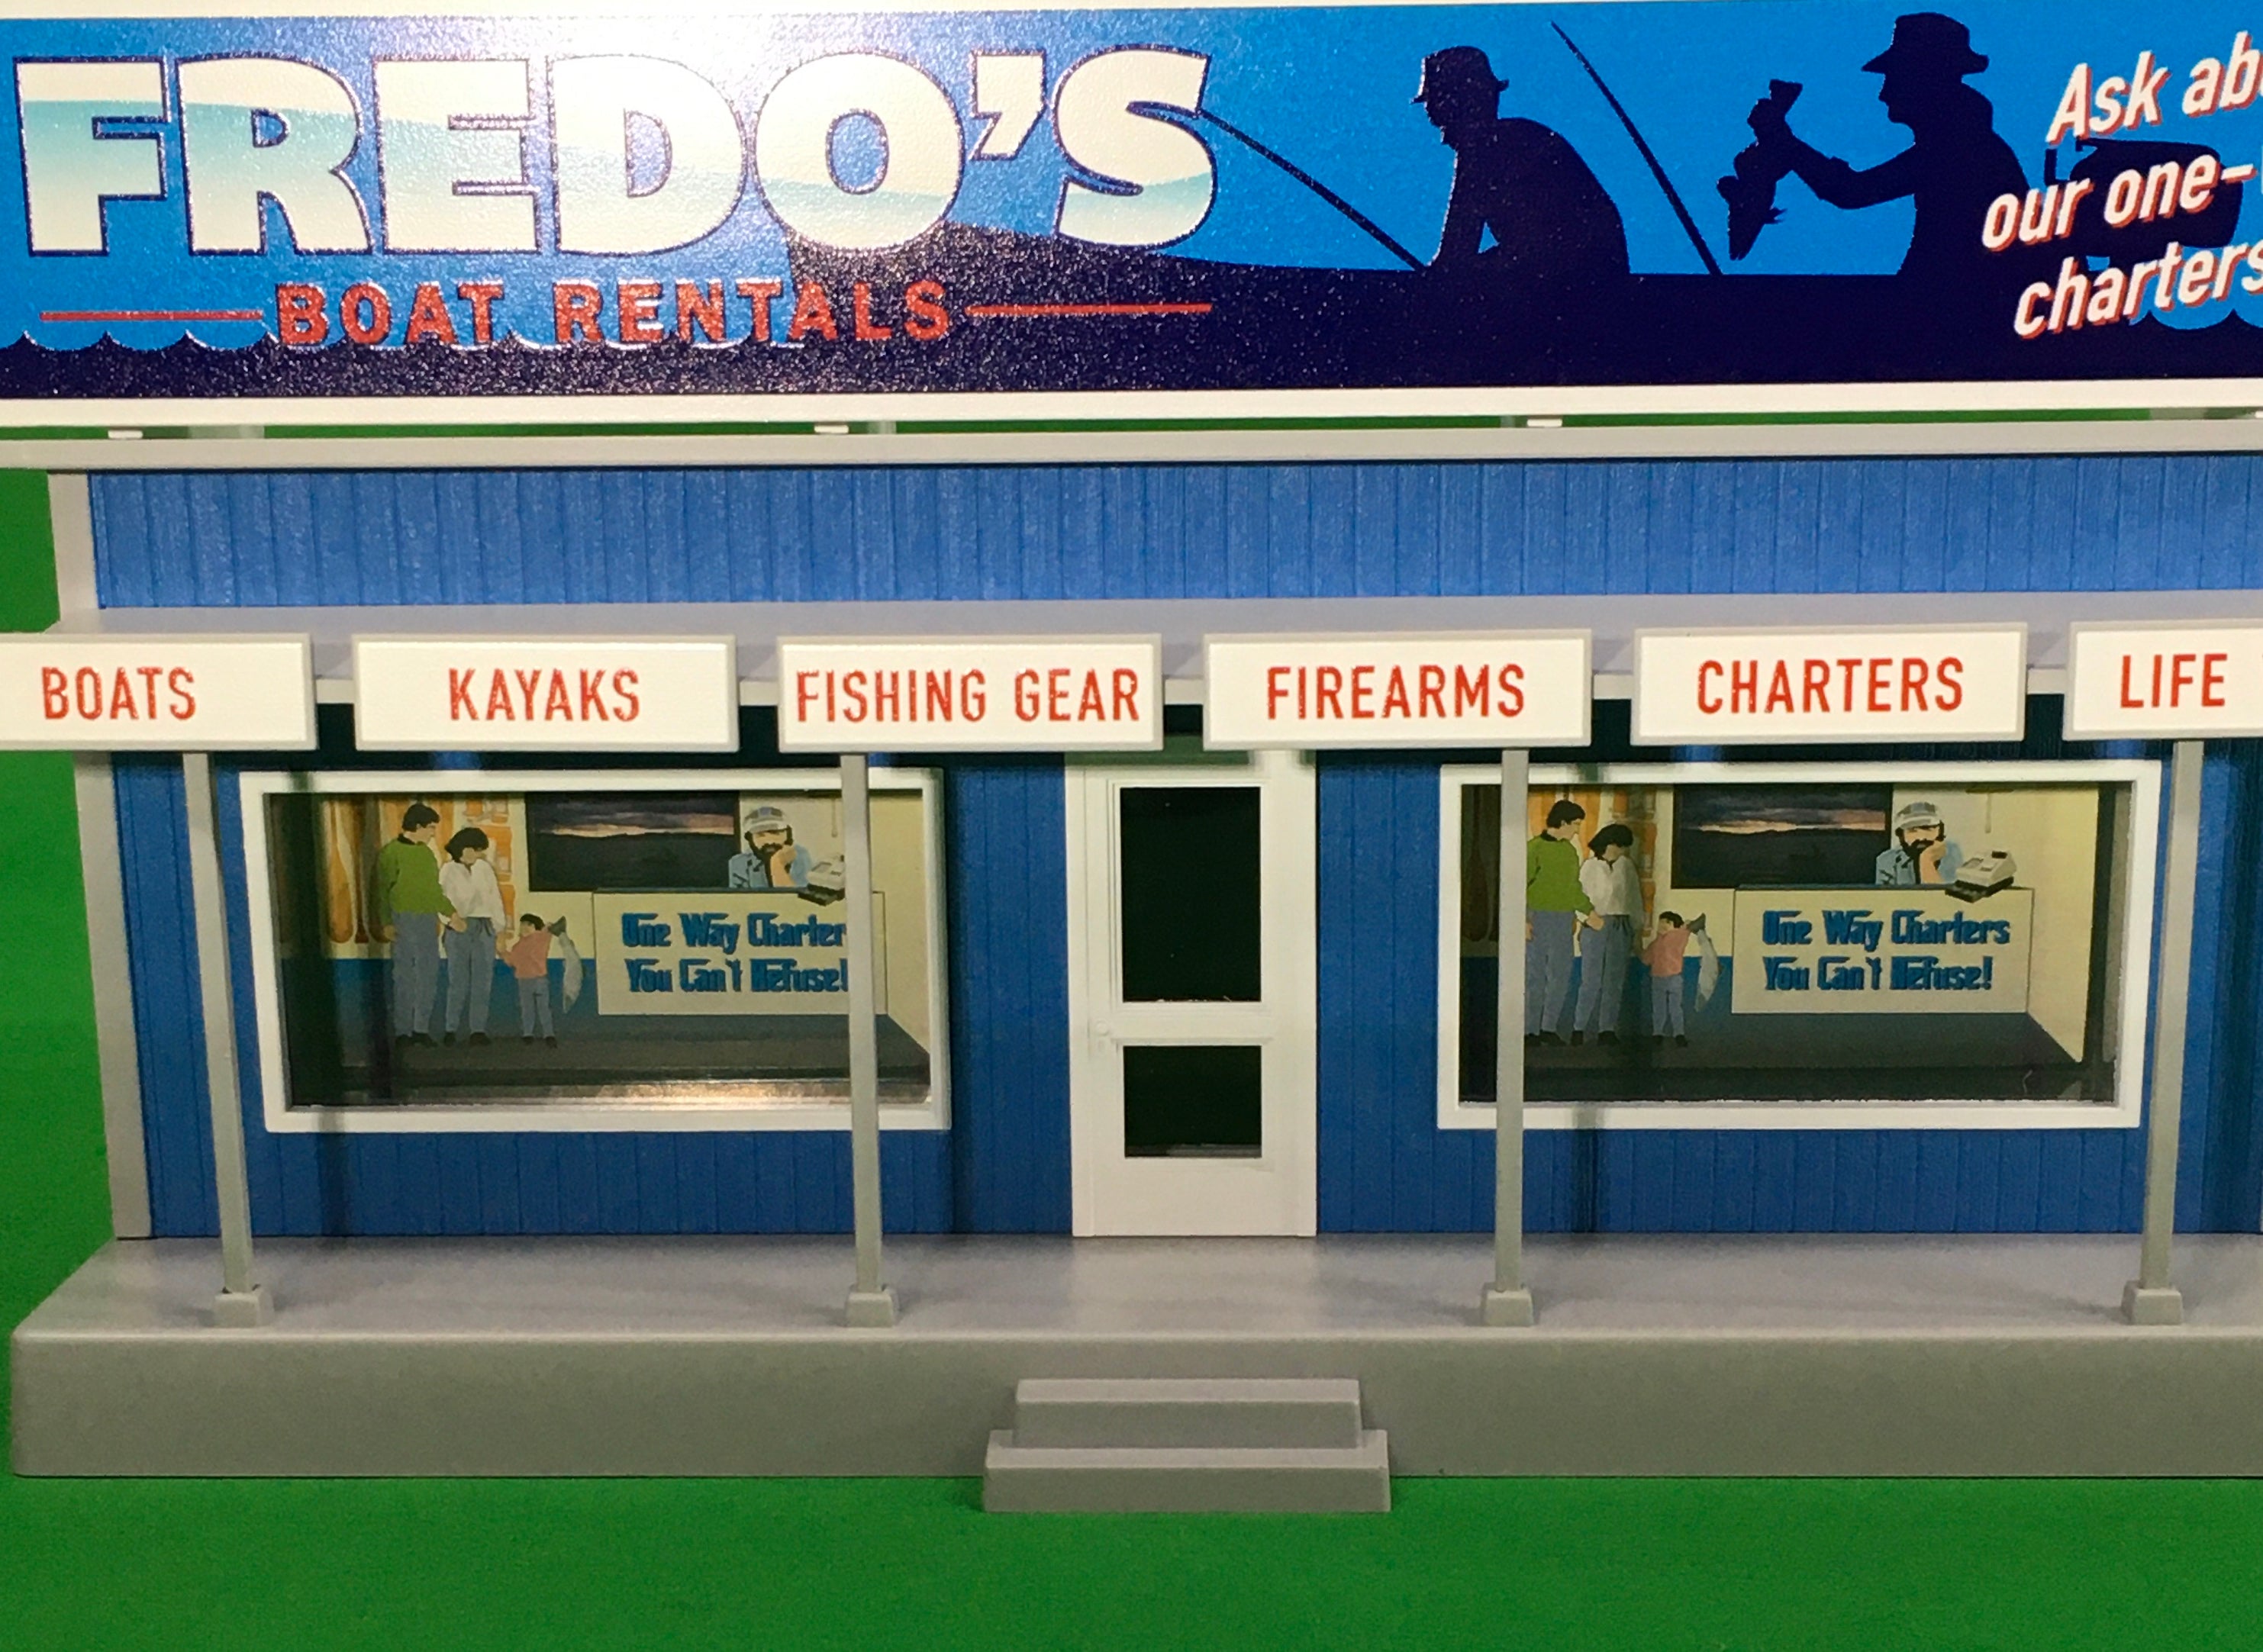 MTH 30-90629 - Road Side Stand "Fredo's Boat Rentals"